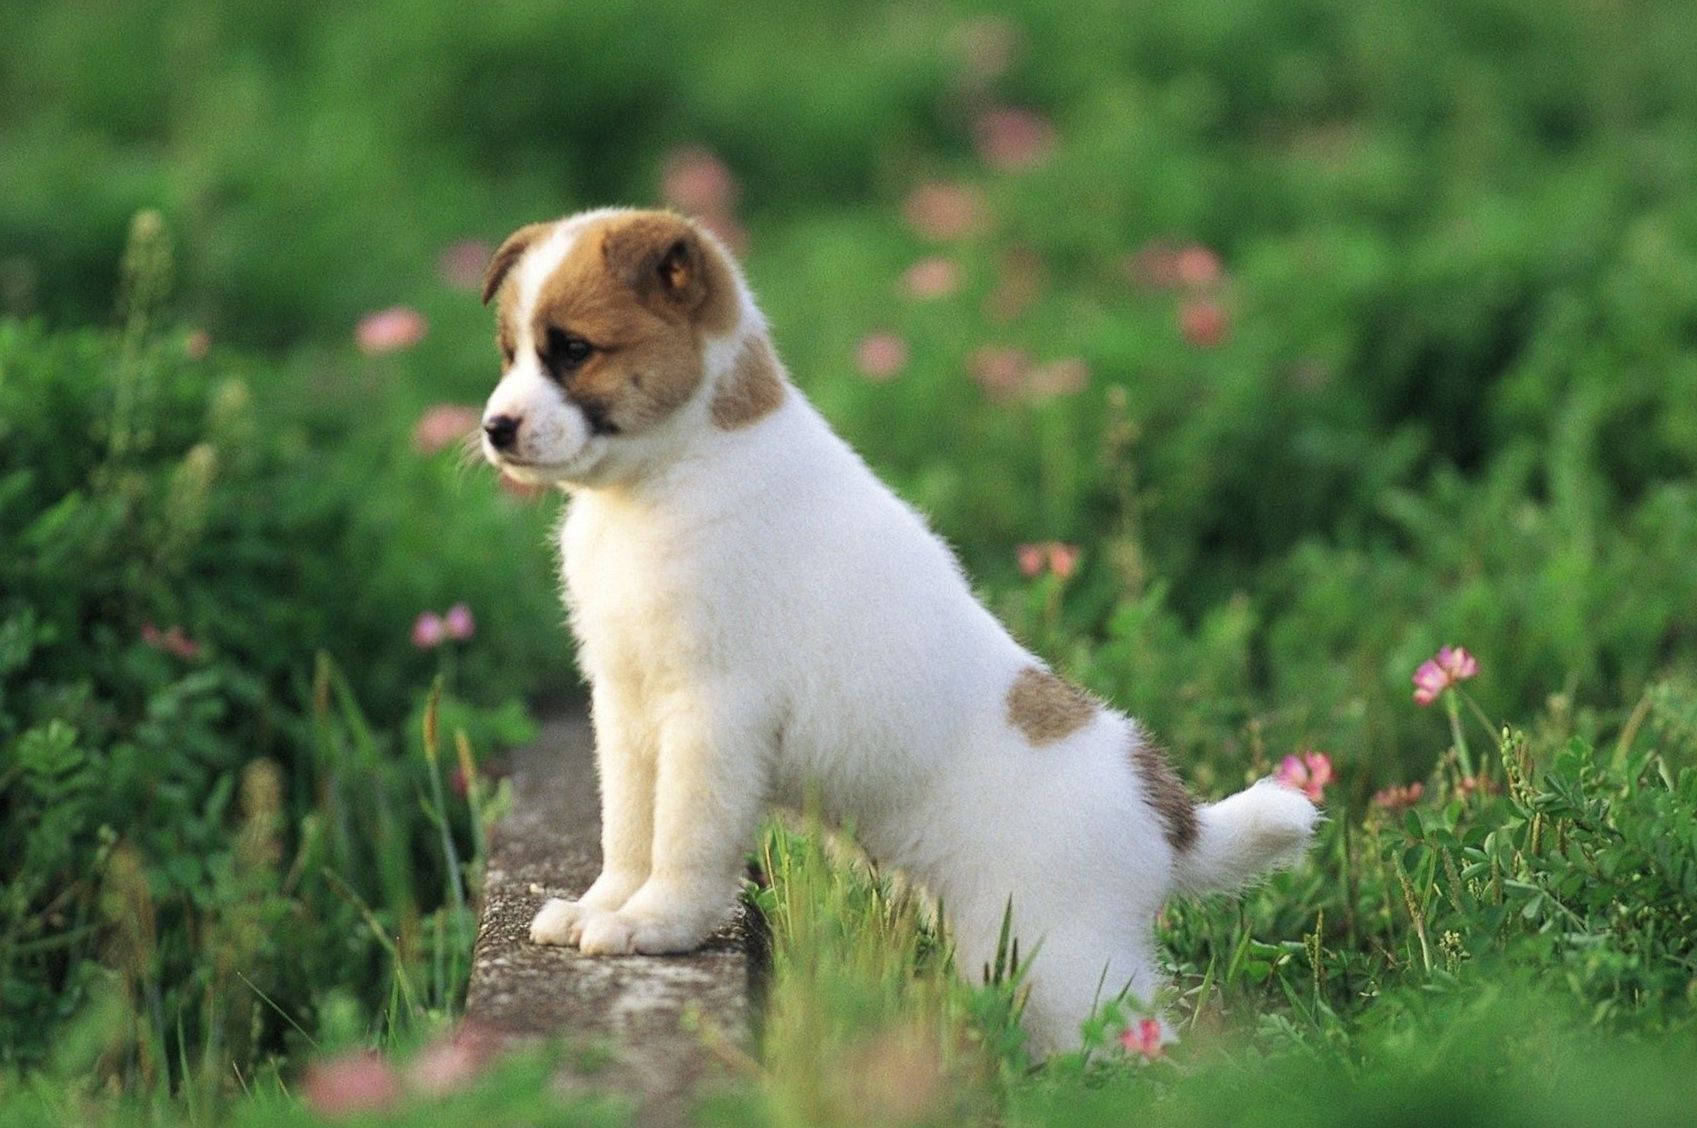 Puppy Dog On Grass With Pink Flowers Wallpaper